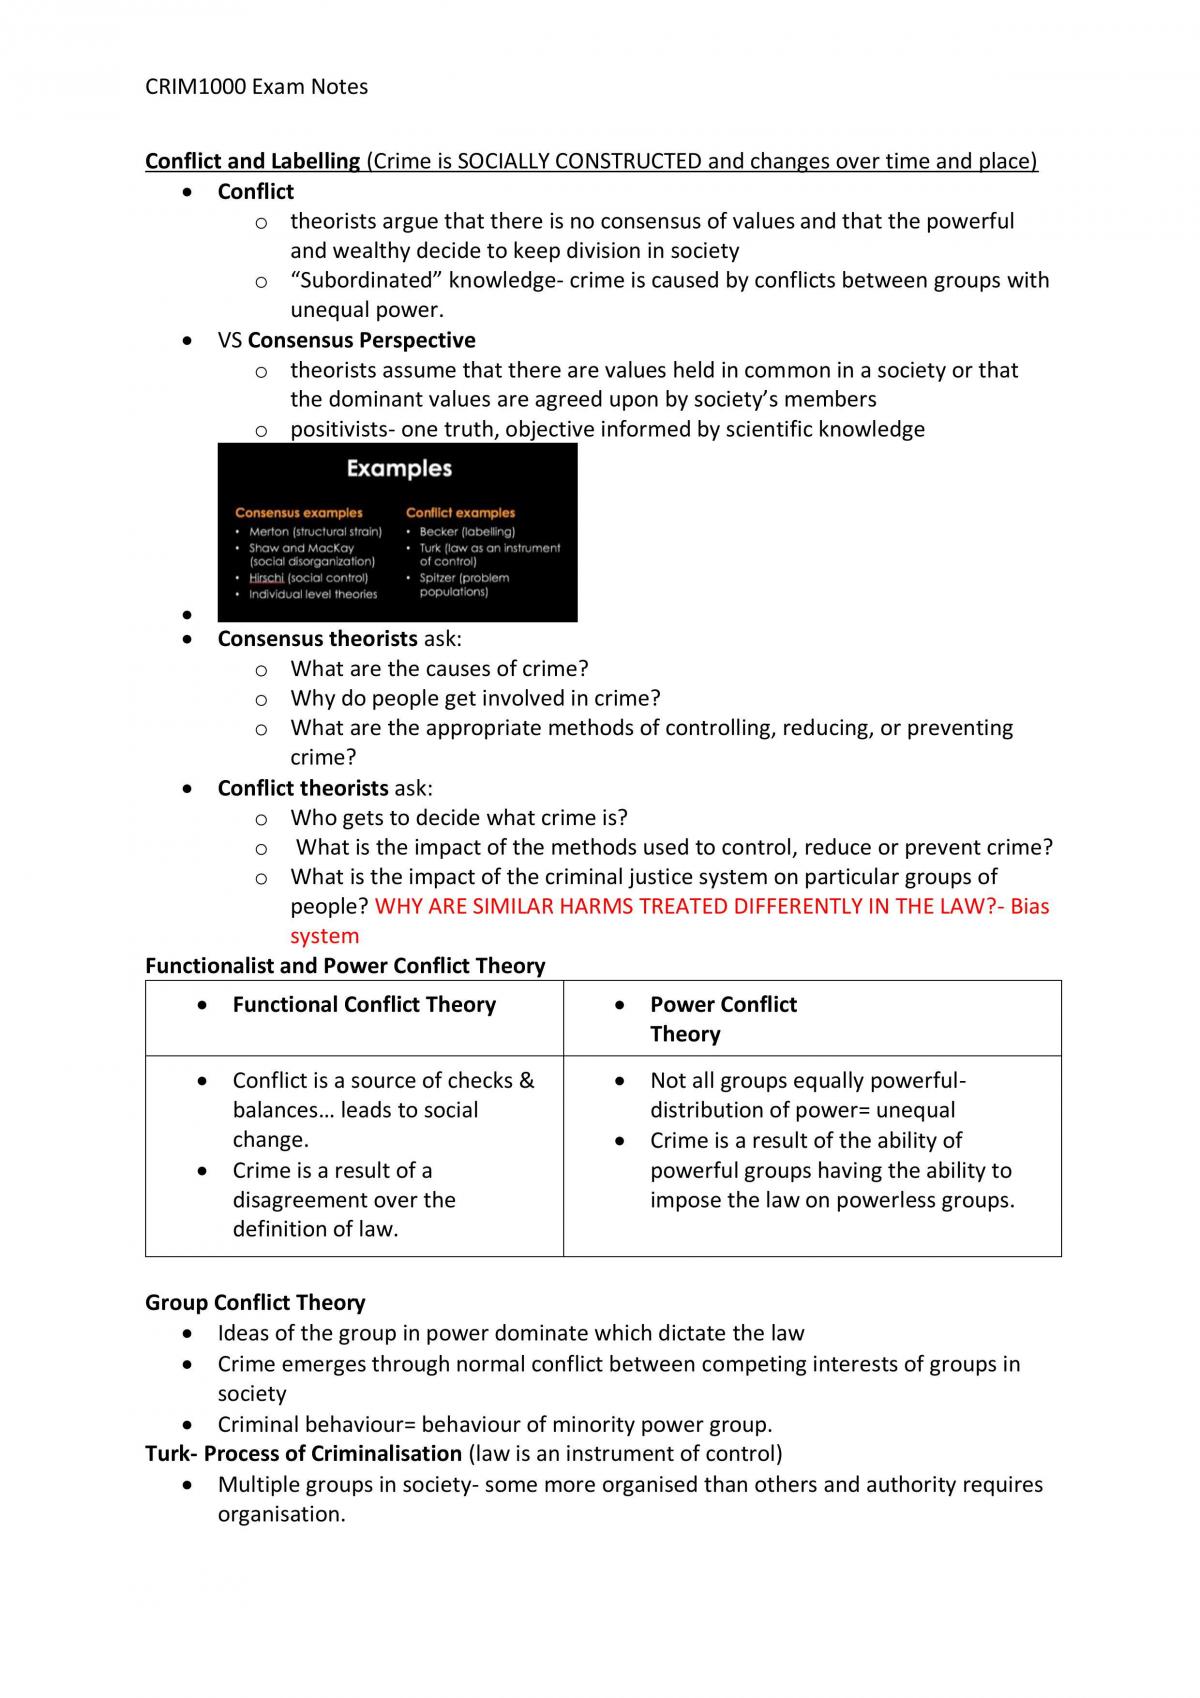 CRIM1000 Complete Study Notes - Page 11